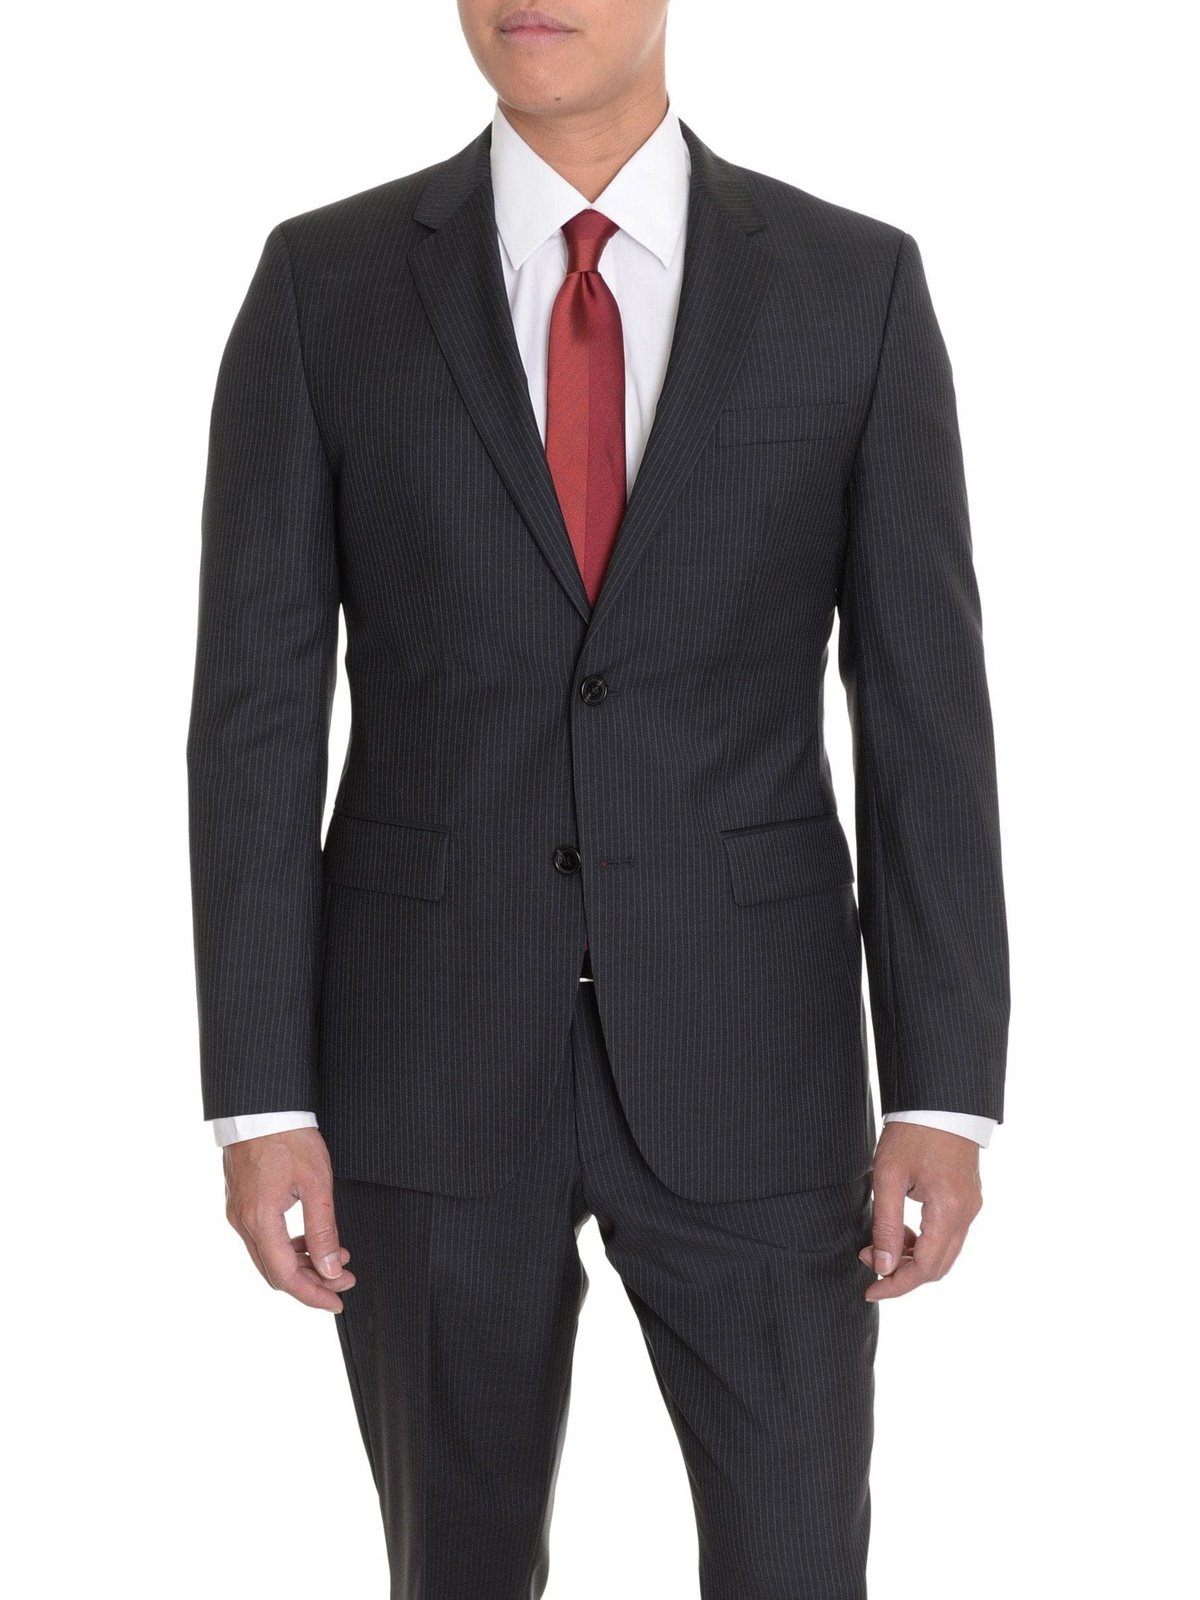 HUGO BOSS TWO PIECE SUITS HUGO BOSS The Grand/Central Charcoal Gray Striped Wool Suit